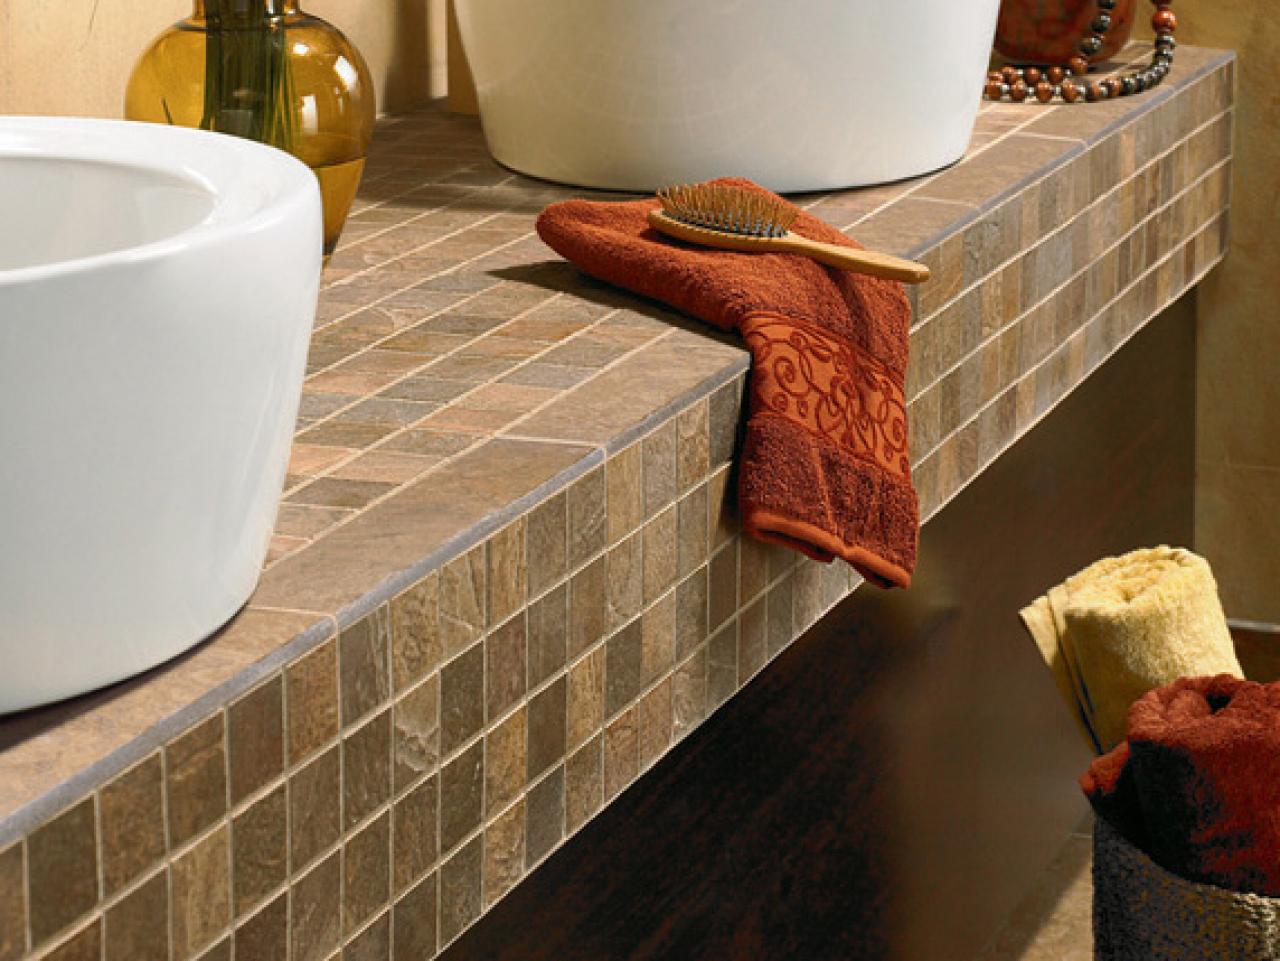 Tile Countertop Ing Guide, Are Ceramic Tile Countertops Out Of Style